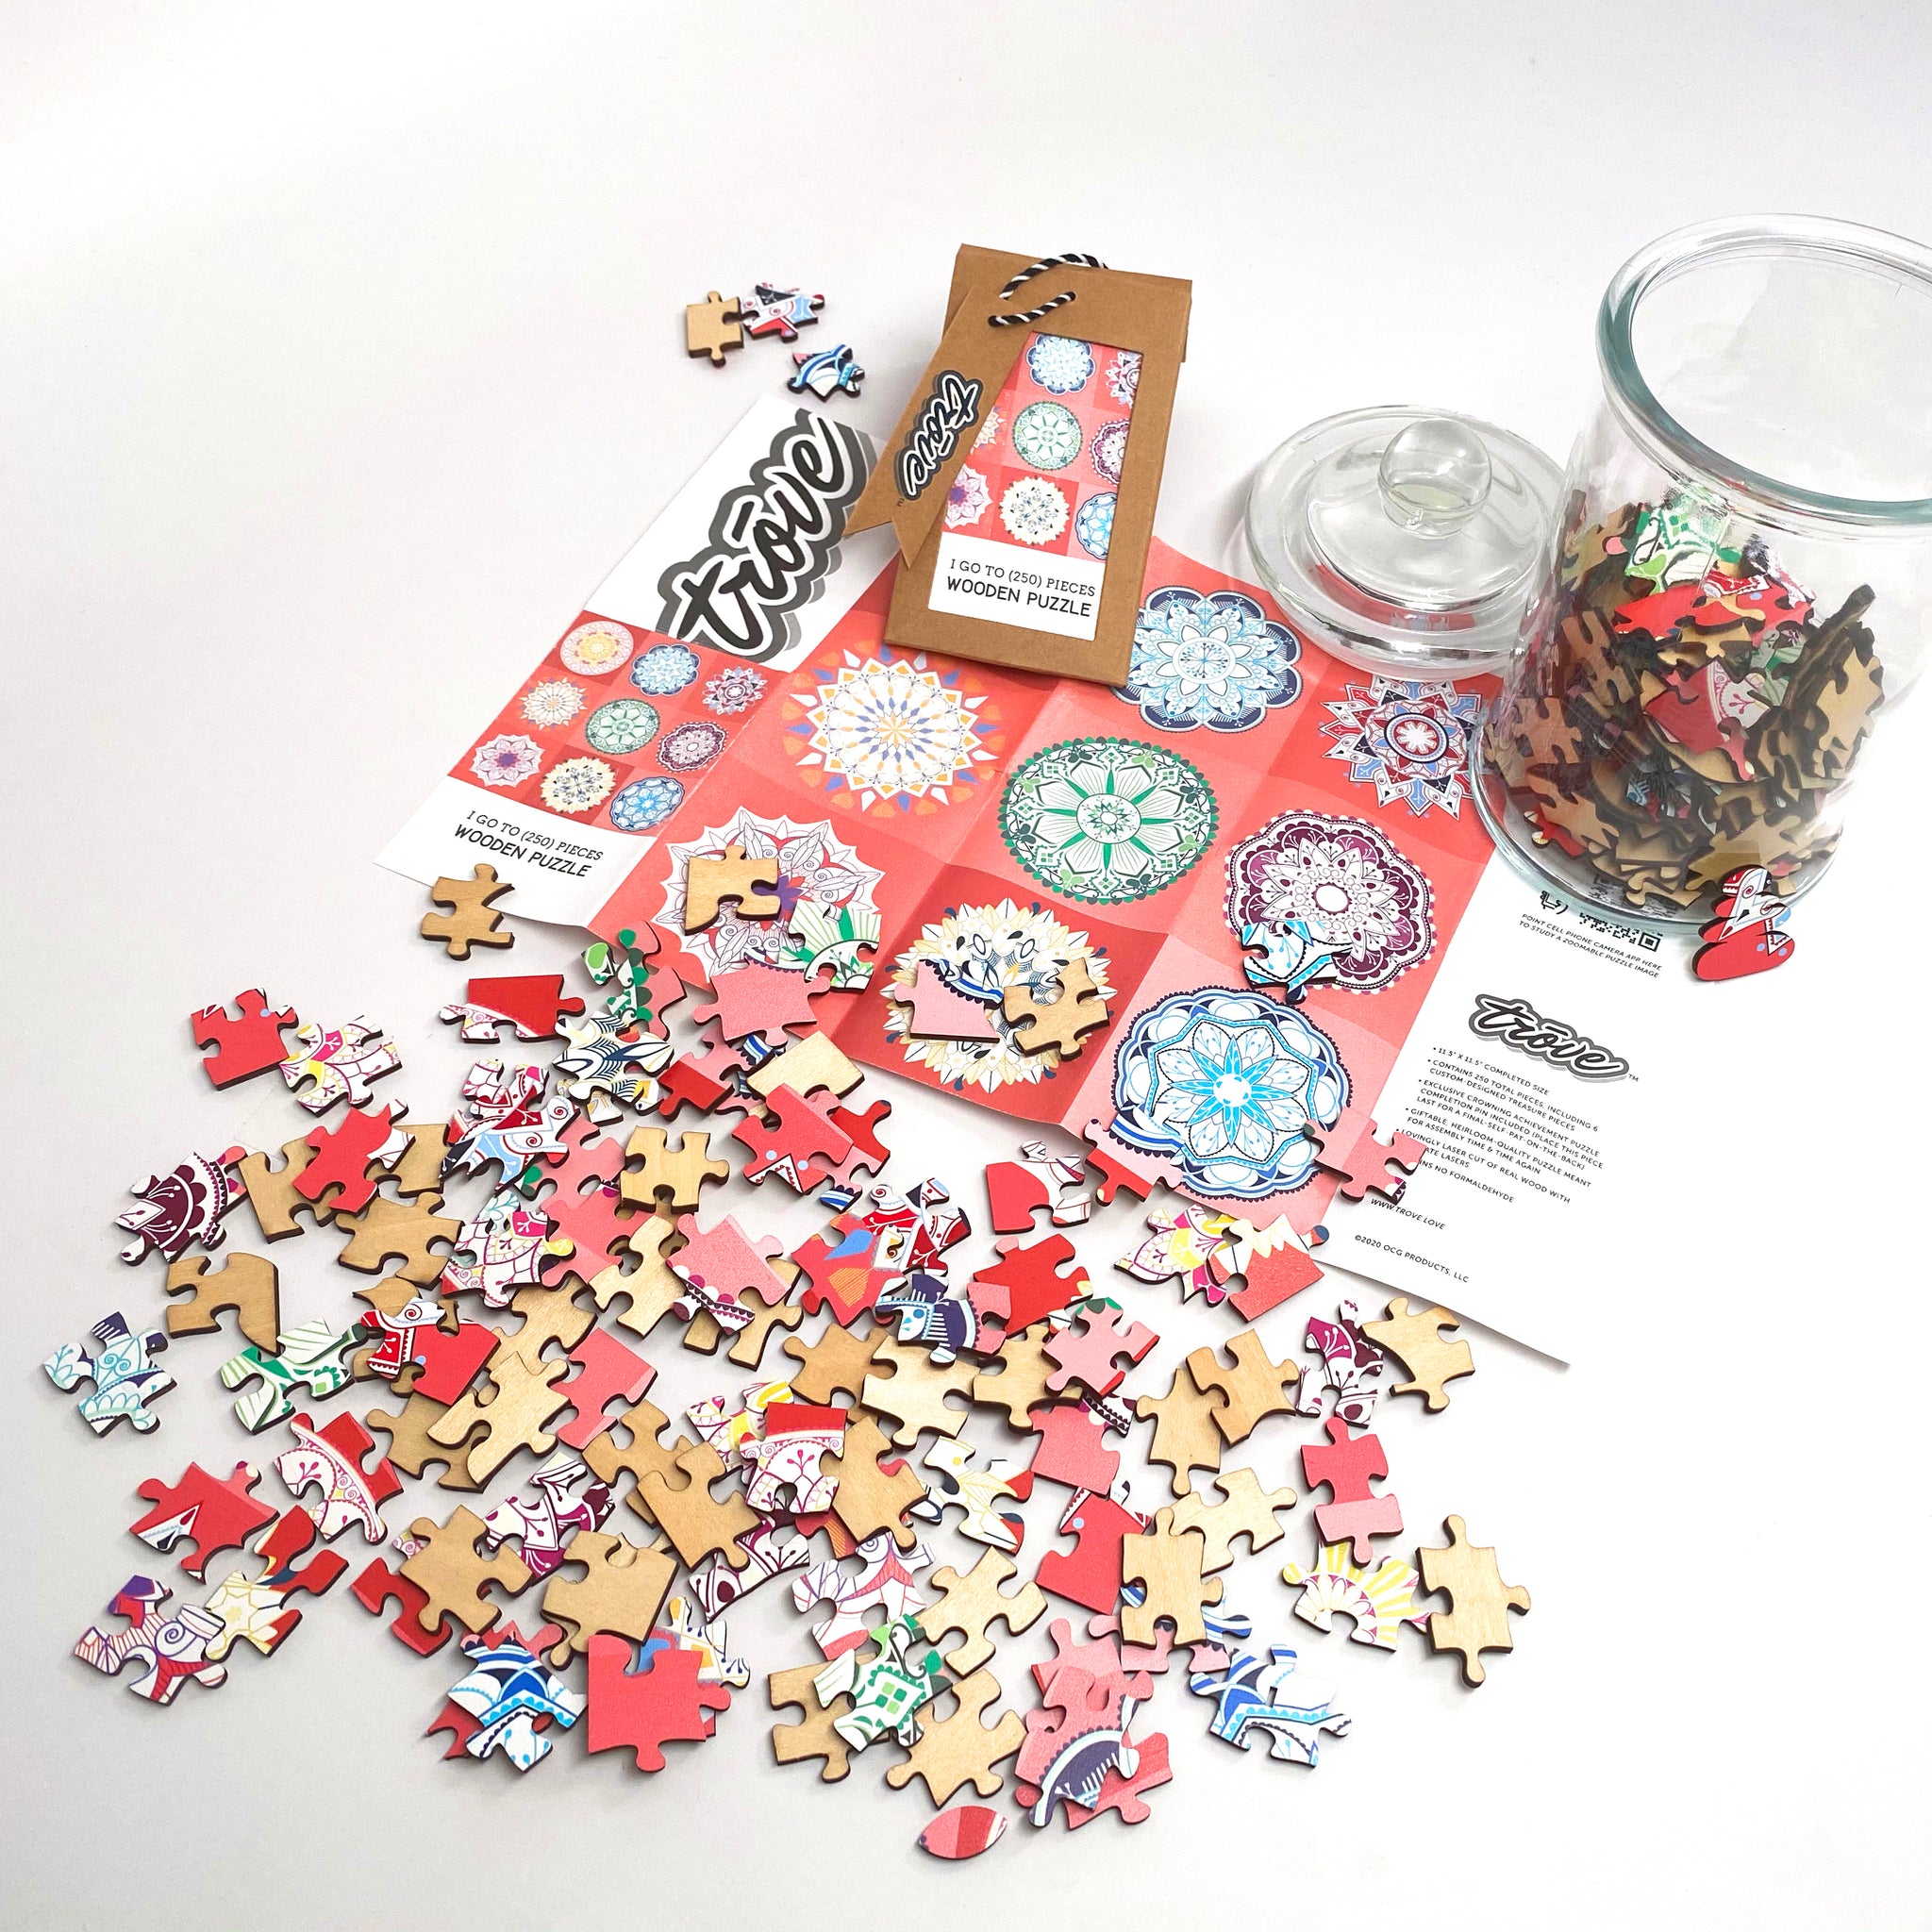 I Go To (250) Pieces Wooden Puzzle: 9 Mandalas in Glass Apothecary Jar